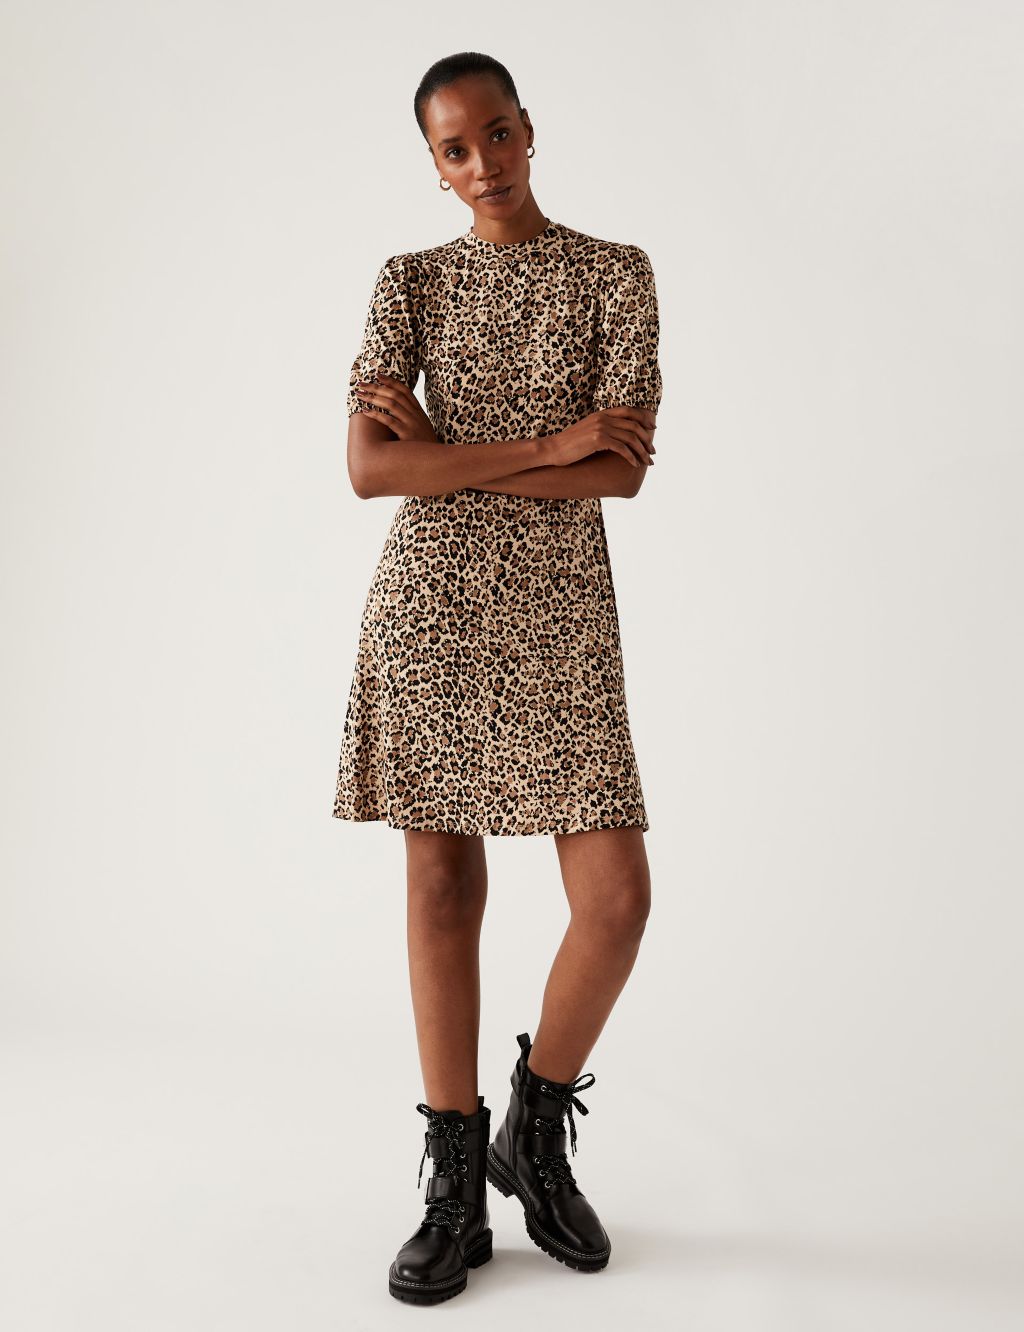 Jersey Animal Print High Neck Skater Dress | M&S Collection | M&S